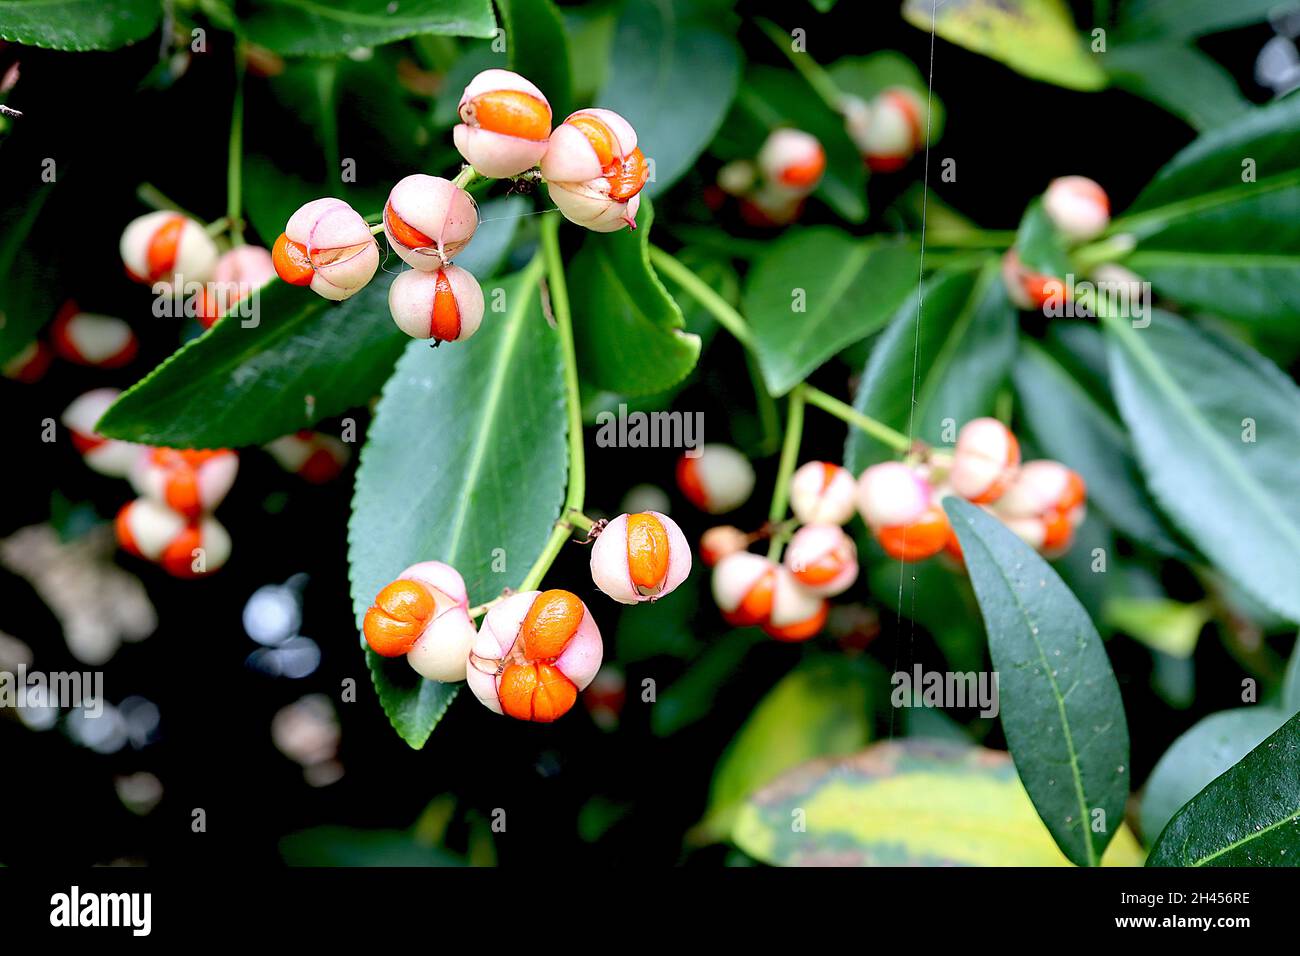 Euonymus japonicus ‘Golden Maiden’ spindle Golden Maiden – white seed coat splits to orange seeds, dark green leaves with yellow splash,  October, UK Stock Photo